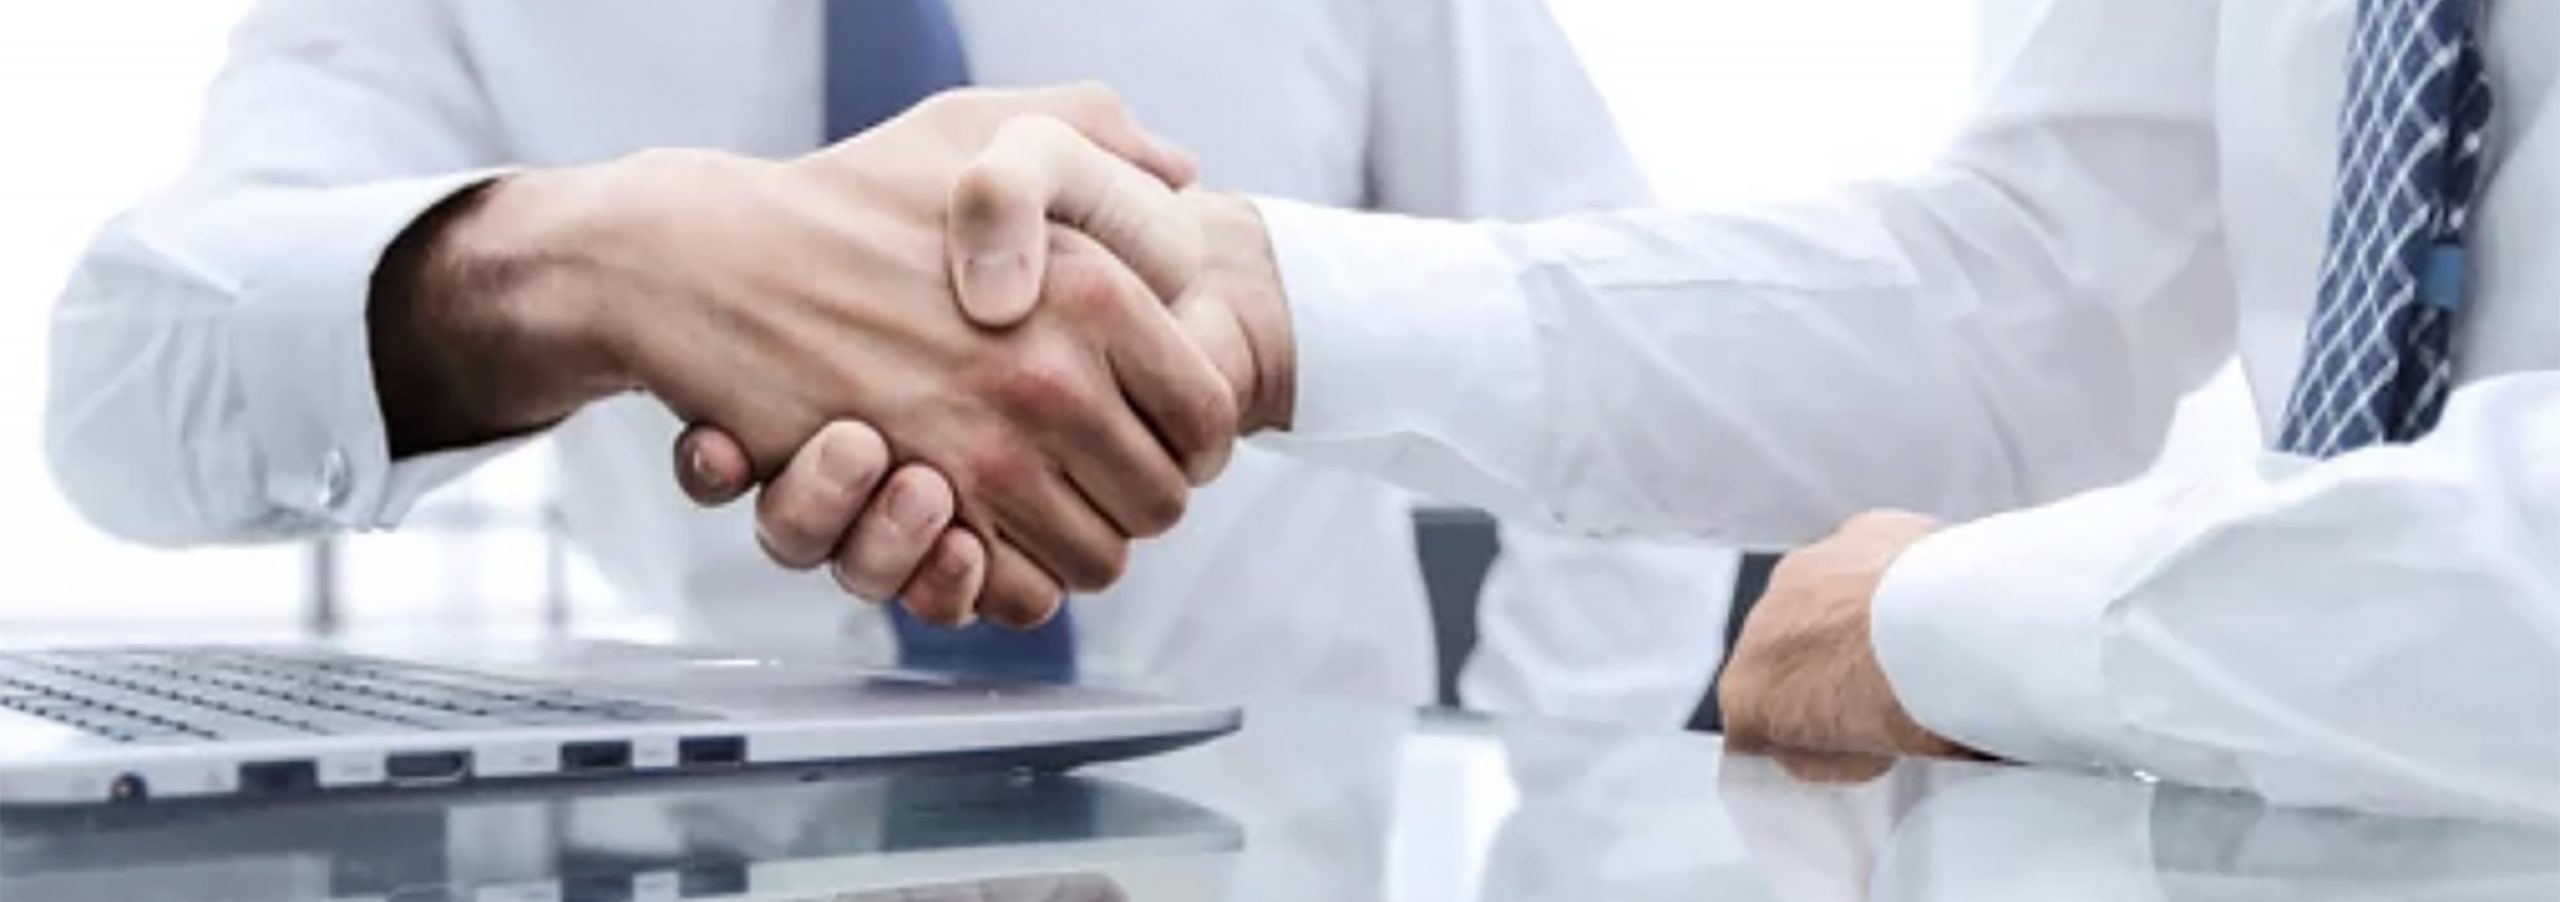 two people shaking hands over a desk.